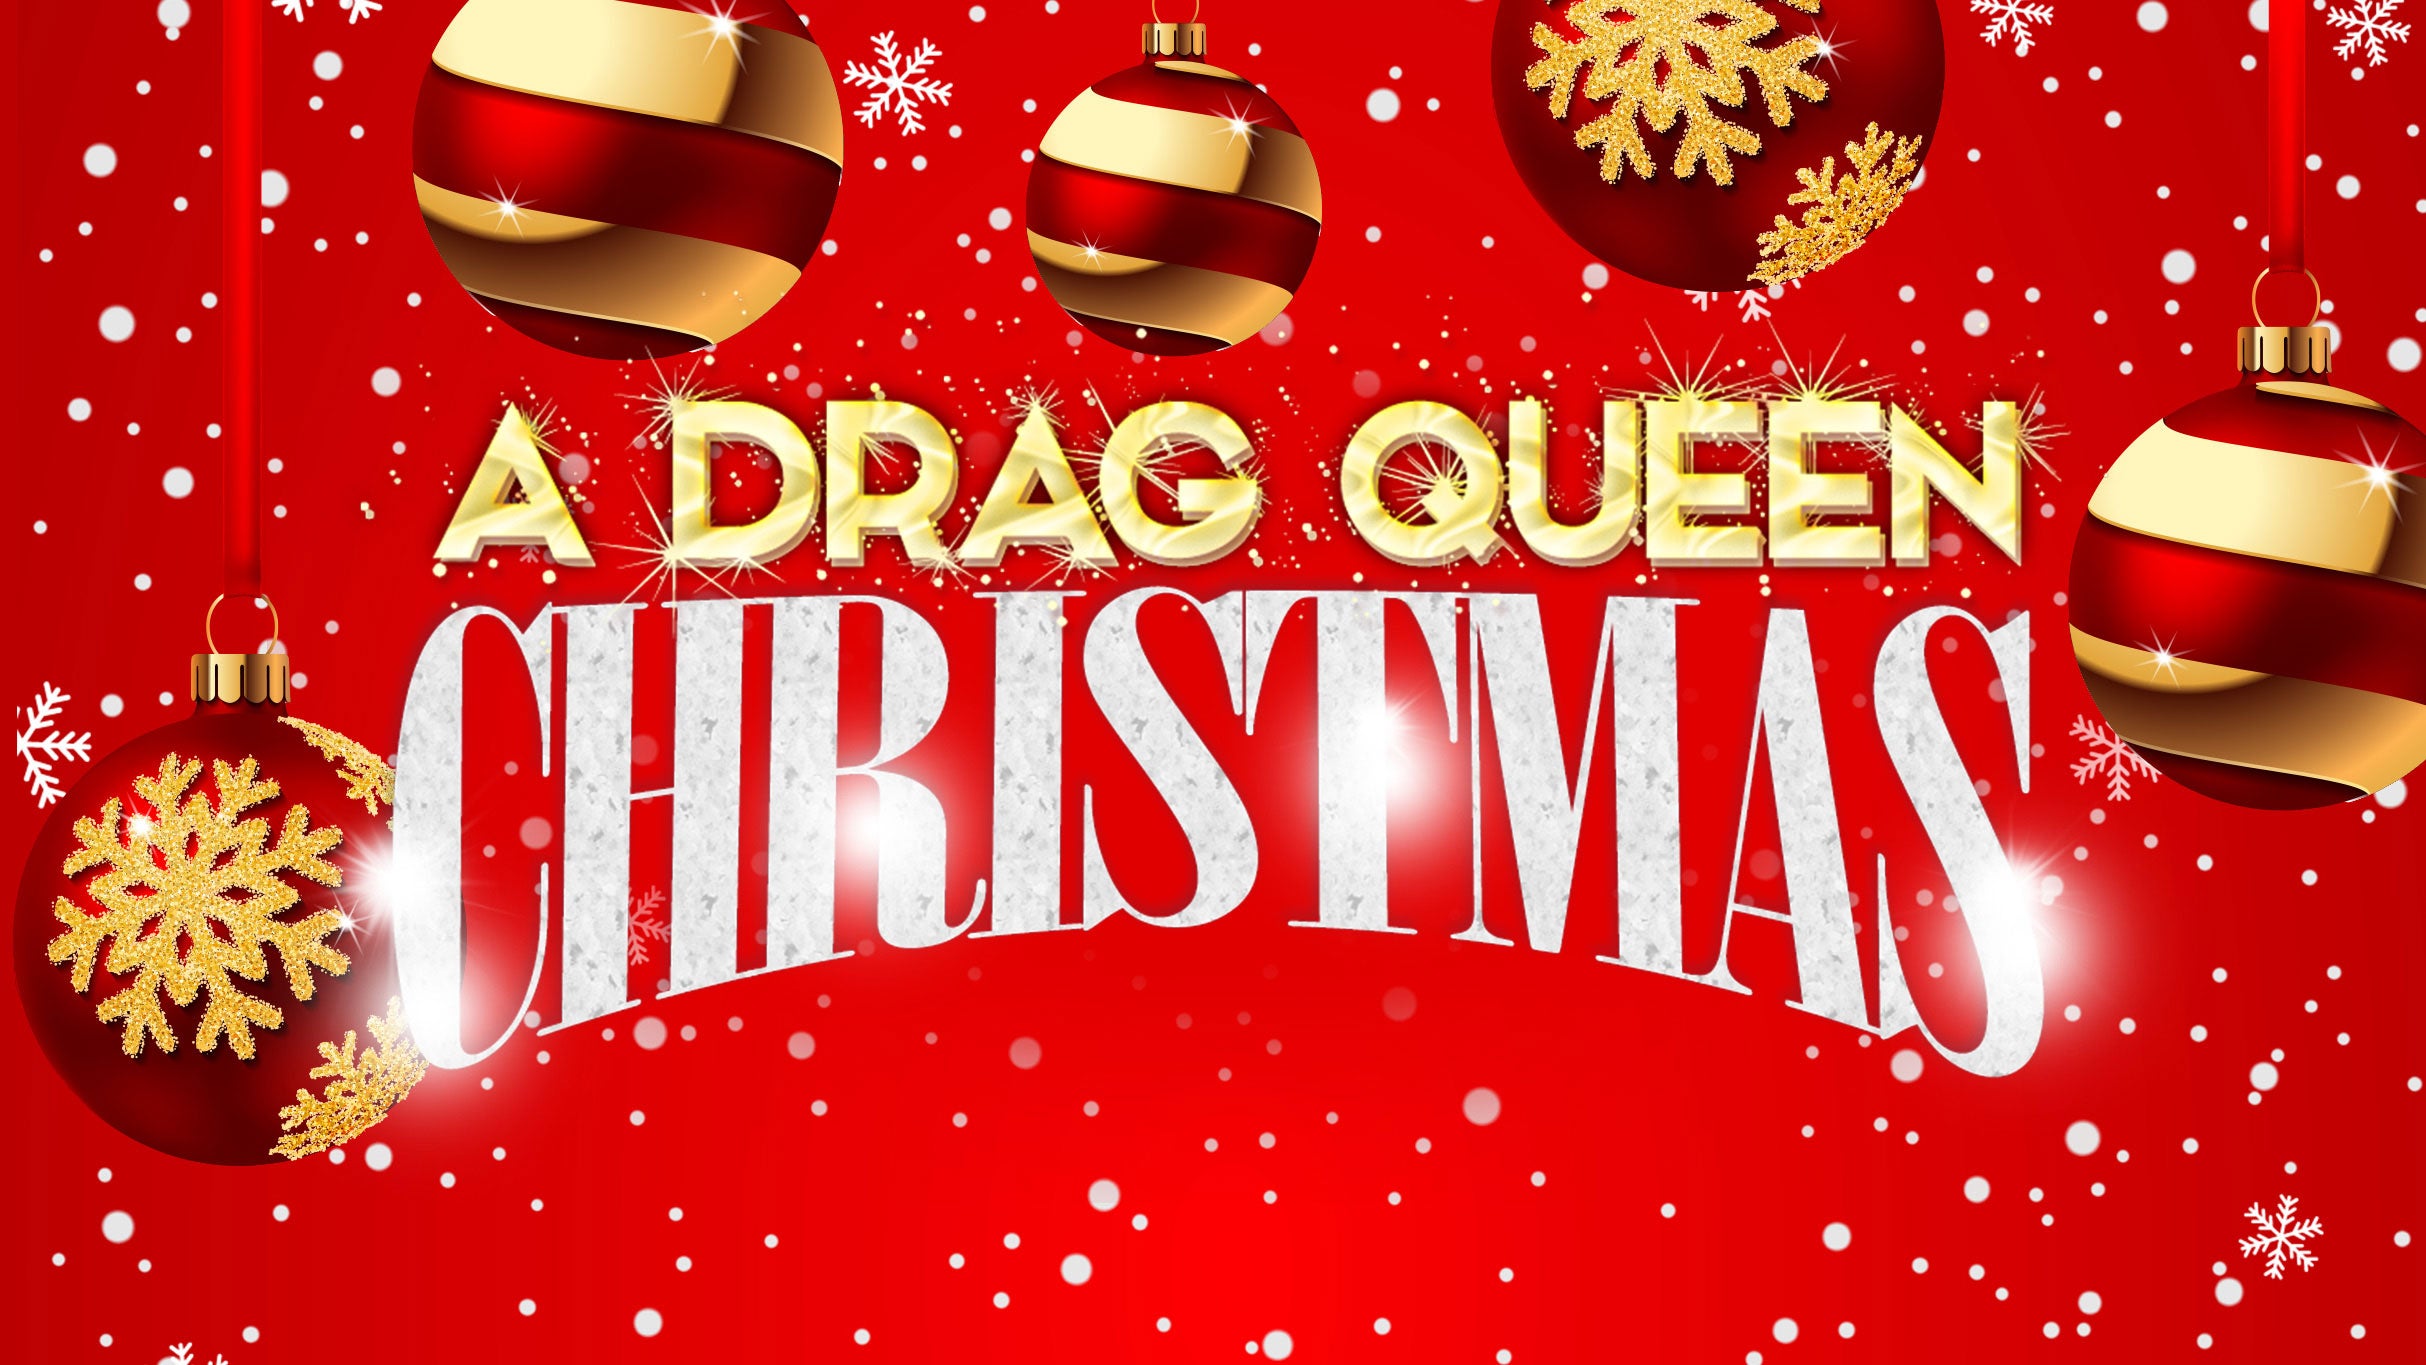 A Drag Queen Christmas free presale code for show tickets in Baltimore, MD (The Lyric)